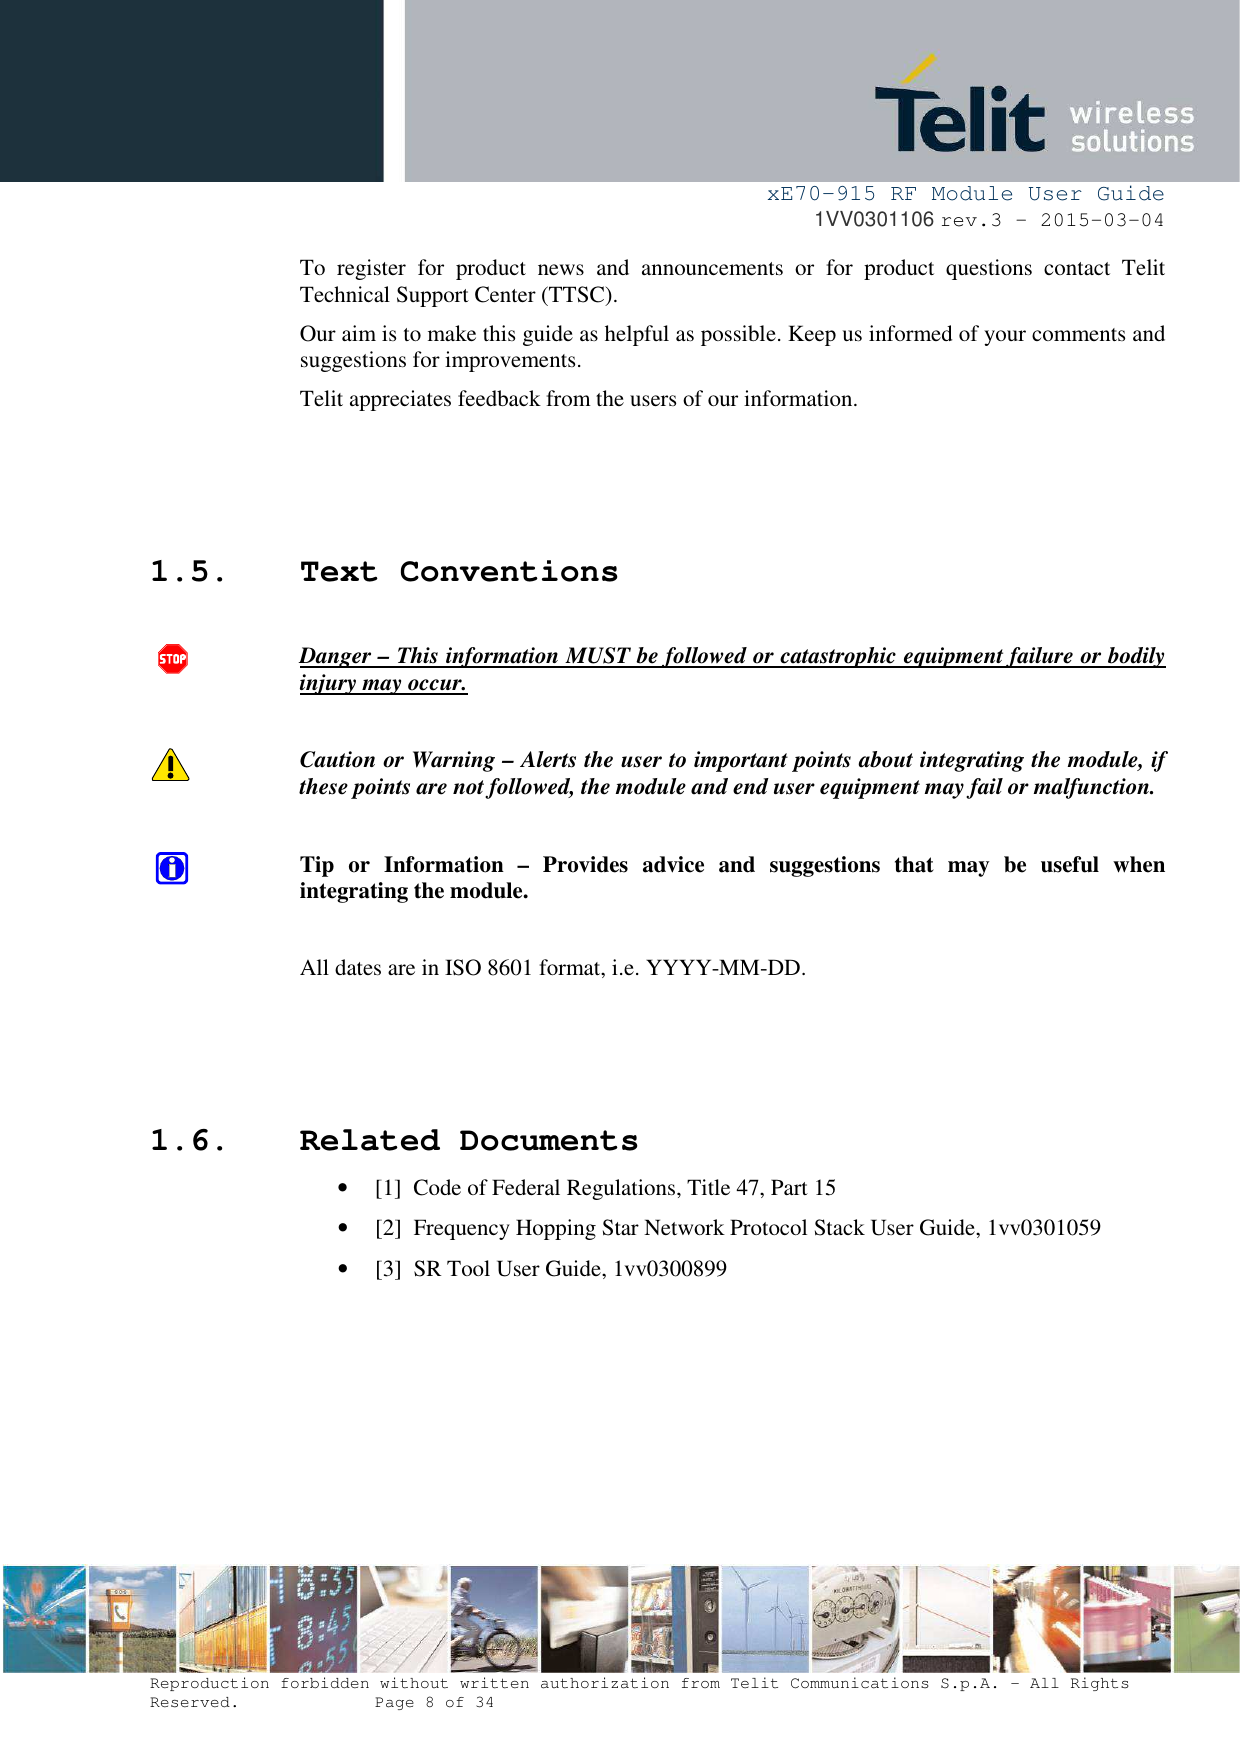     xE70-915 RF Module User Guide 1VV0301106 rev.3 – 2015-03-04  Reproduction forbidden without written authorization from Telit Communications S.p.A. - All Rights Reserved.    Page 8 of 34  To  register  for  product  news  and  announcements  or  for  product  questions  contact  Telit Technical Support Center (TTSC). Our aim is to make this guide as helpful as possible. Keep us informed of your comments and suggestions for improvements. Telit appreciates feedback from the users of our information.    1.5. Text Conventions  Danger – This information MUST be followed or catastrophic equipment failure or bodily injury may occur.  Caution or Warning – Alerts the user to important points about integrating the module, if these points are not followed, the module and end user equipment may fail or malfunction.  Tip  or  Information  –  Provides  advice  and  suggestions  that  may  be  useful  when integrating the module.  All dates are in ISO 8601 format, i.e. YYYY-MM-DD.    1.6. Related Documents • [1]  Code of Federal Regulations, Title 47, Part 15 • [2]  Frequency Hopping Star Network Protocol Stack User Guide, 1vv0301059 • [3]  SR Tool User Guide, 1vv0300899   